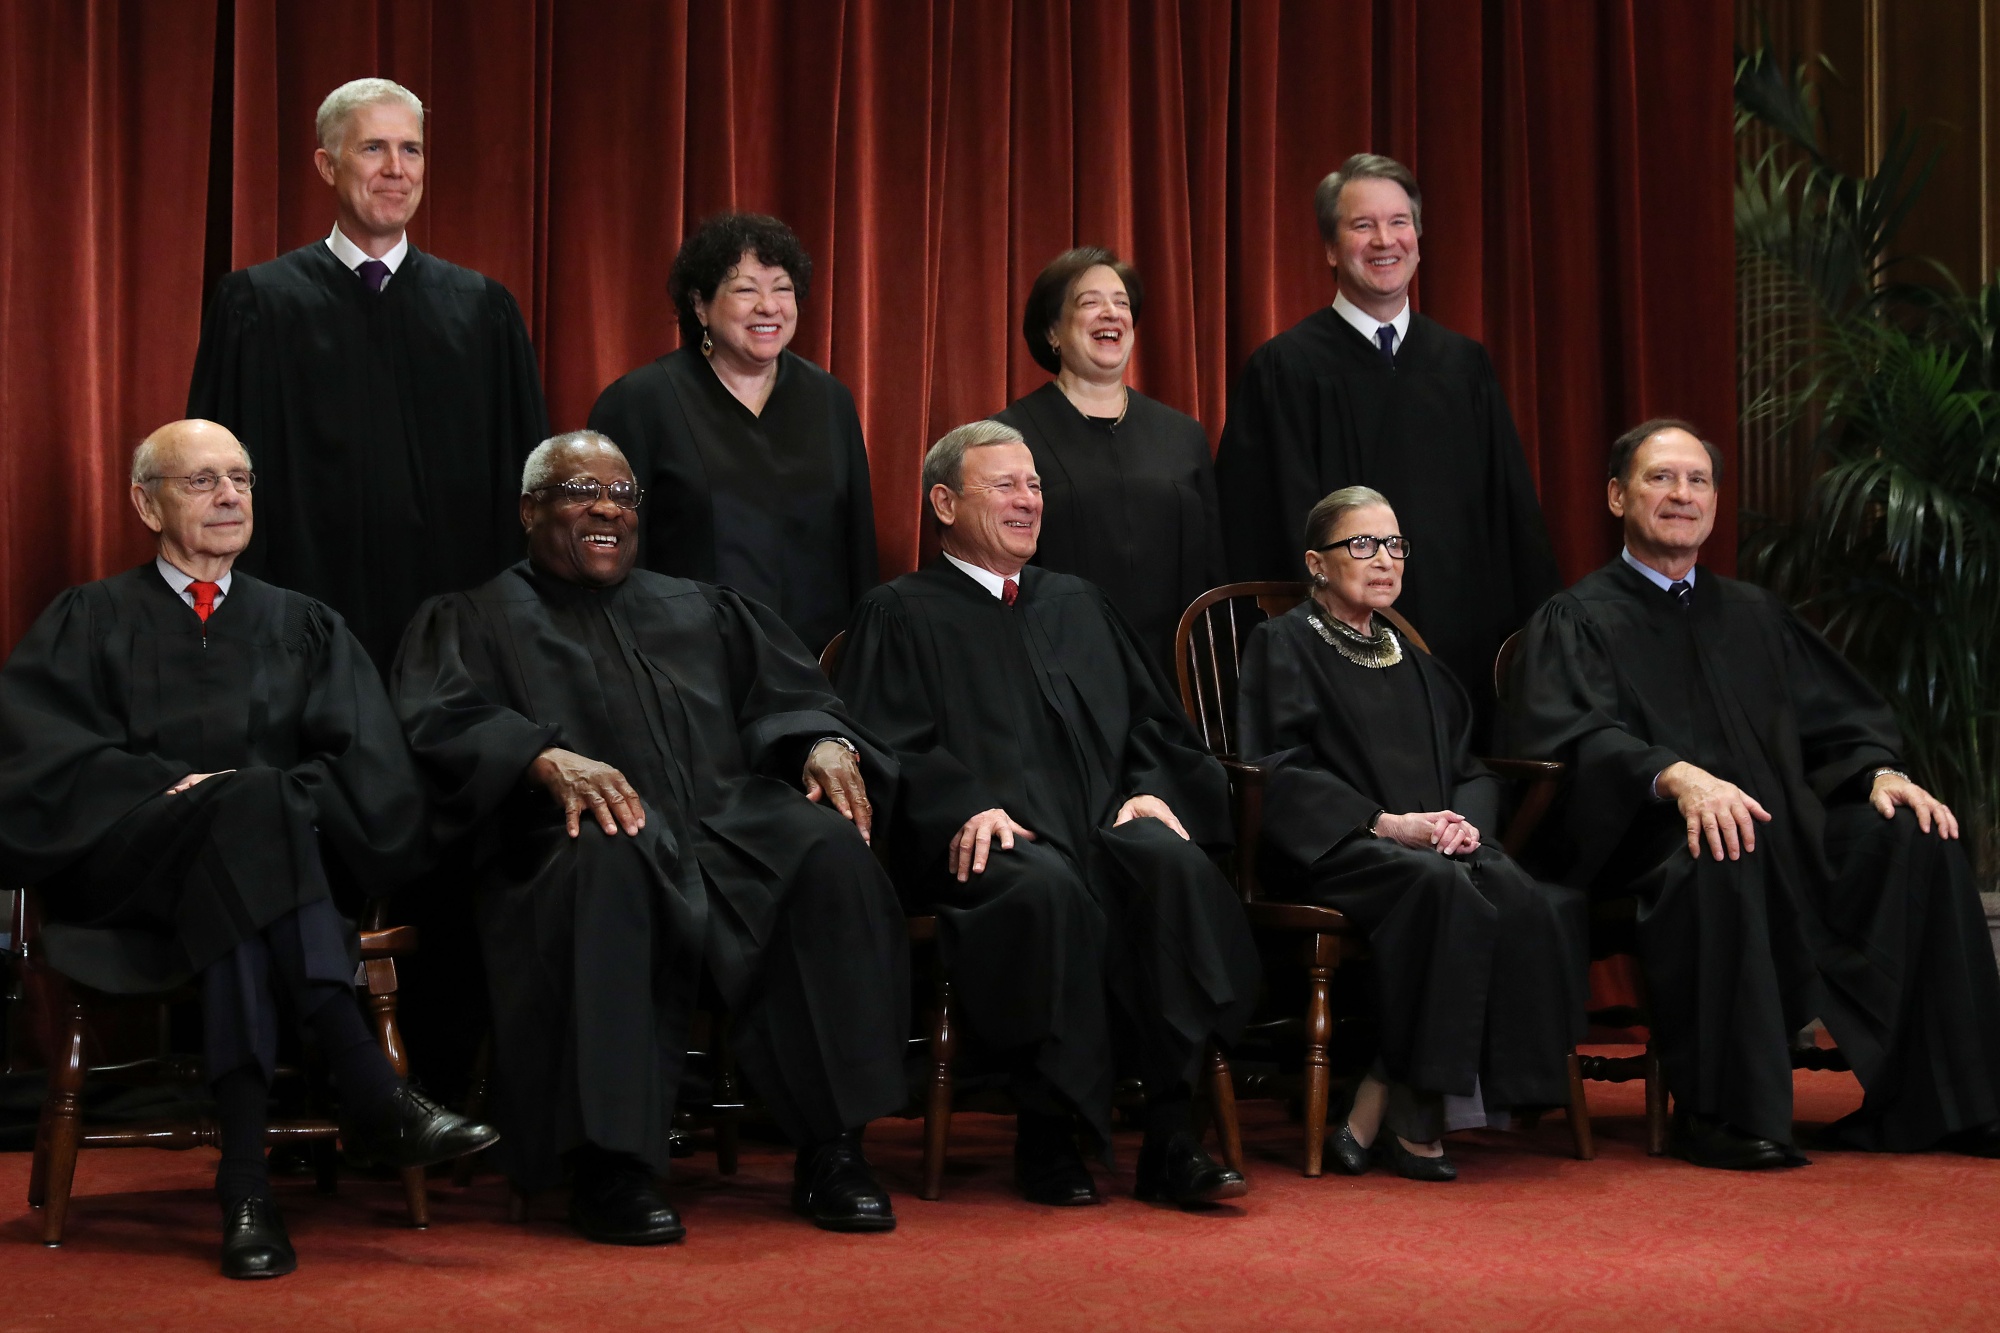 Republicans Could Confirm a New Supreme Court Justice Before 2021